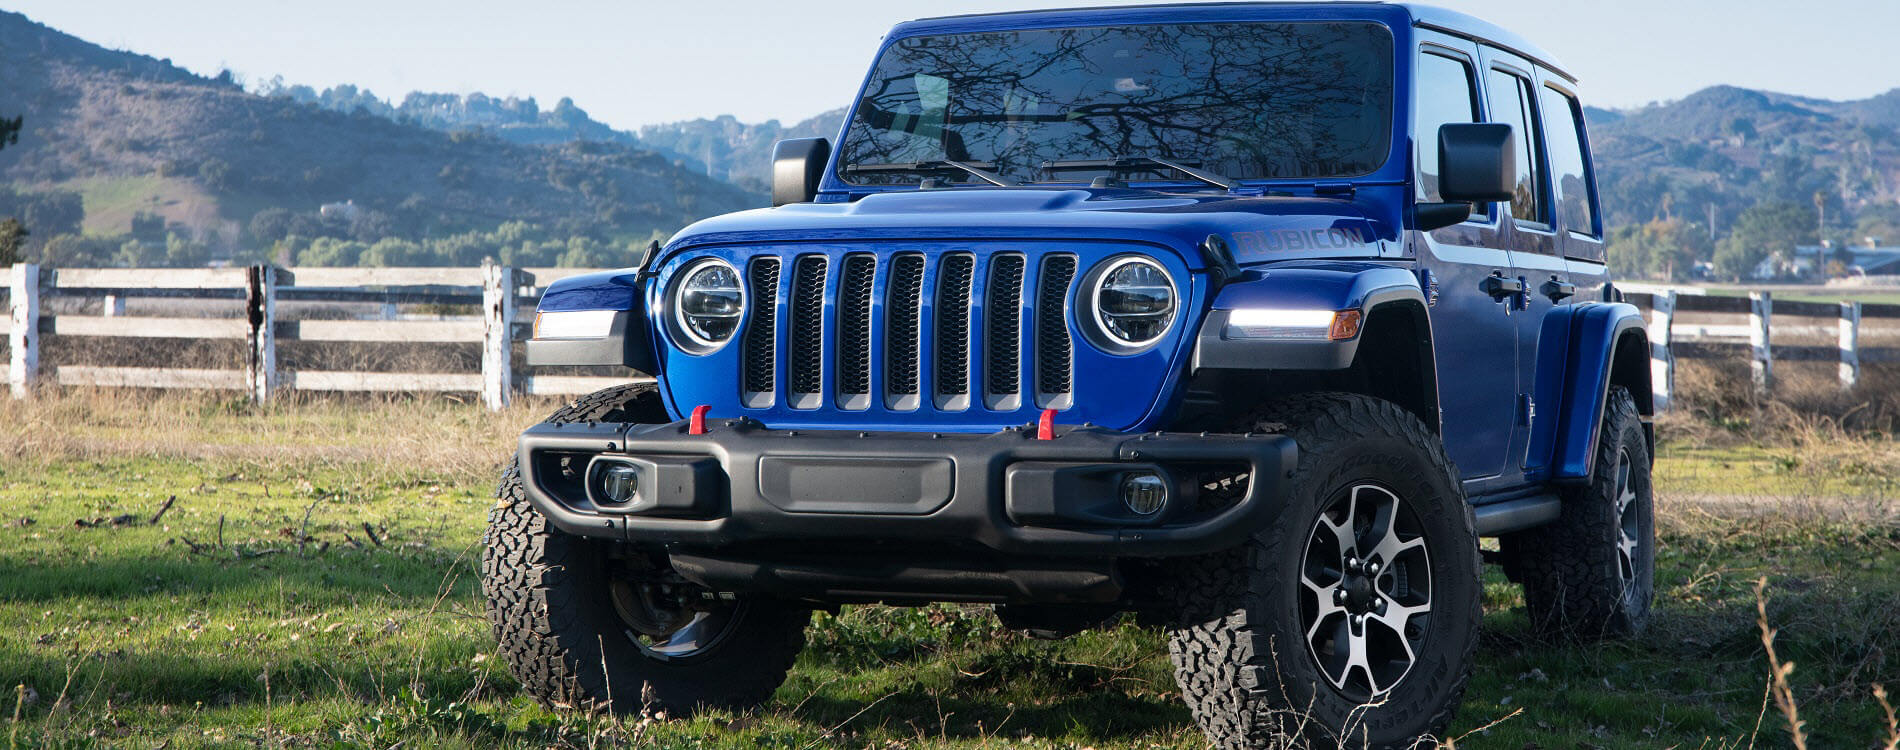 21 Jeep Wrangler Review Fremont Motor Company Wy